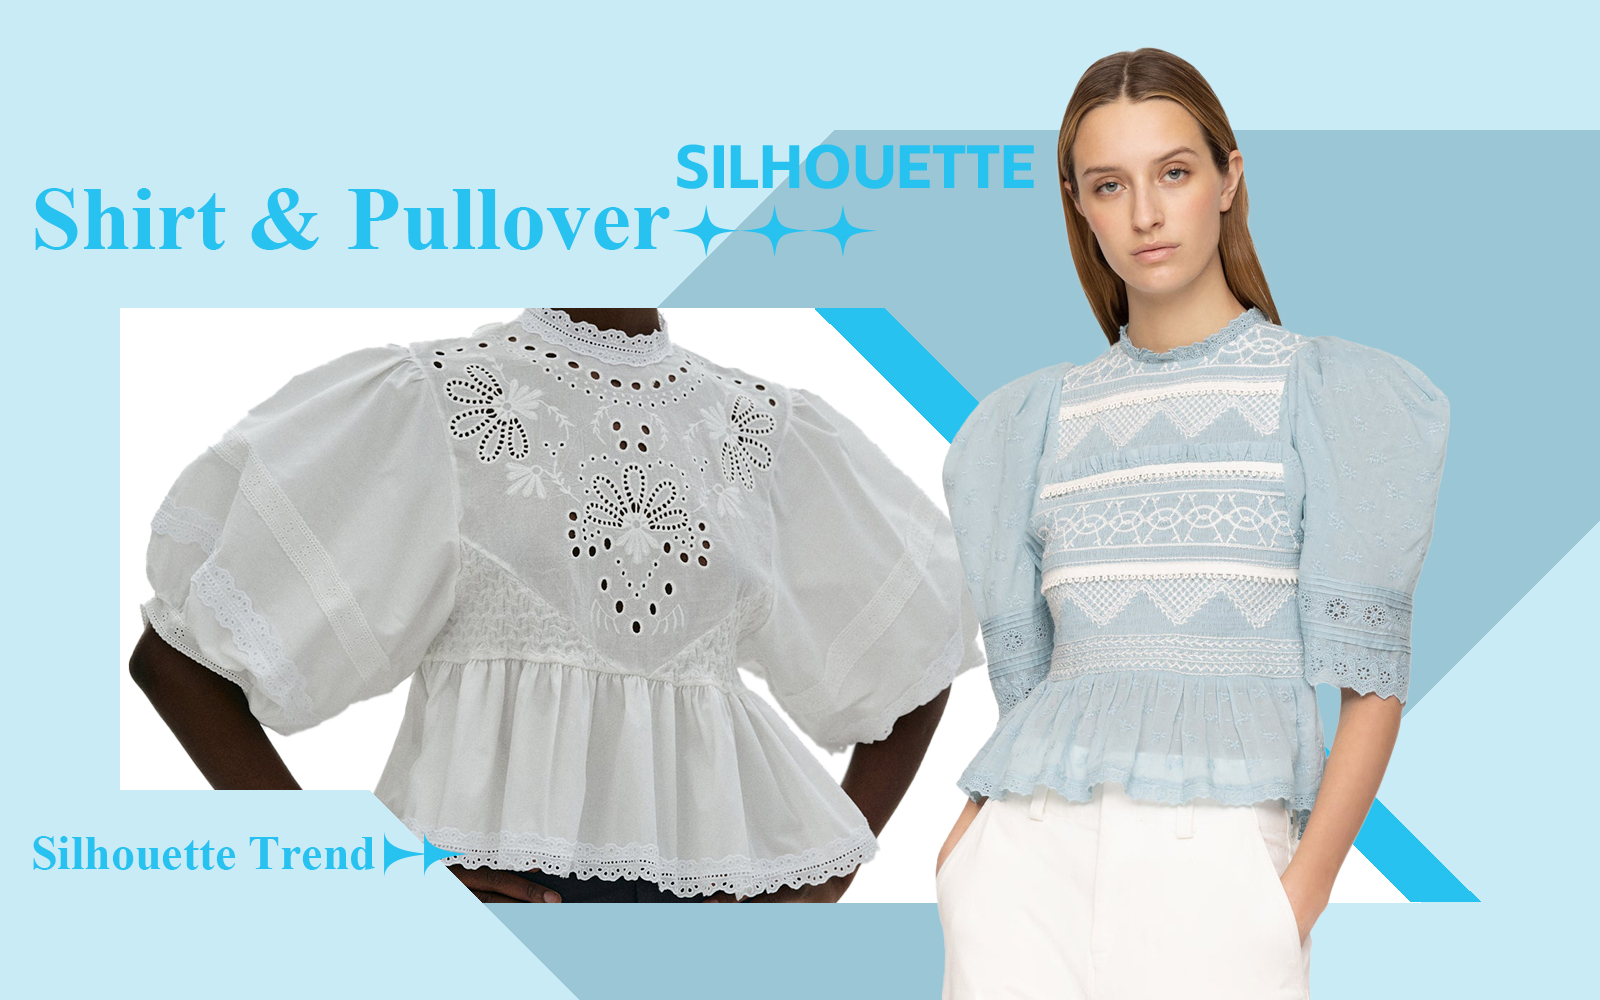 The Silhouette Trend for Women's Shirt & Pullover